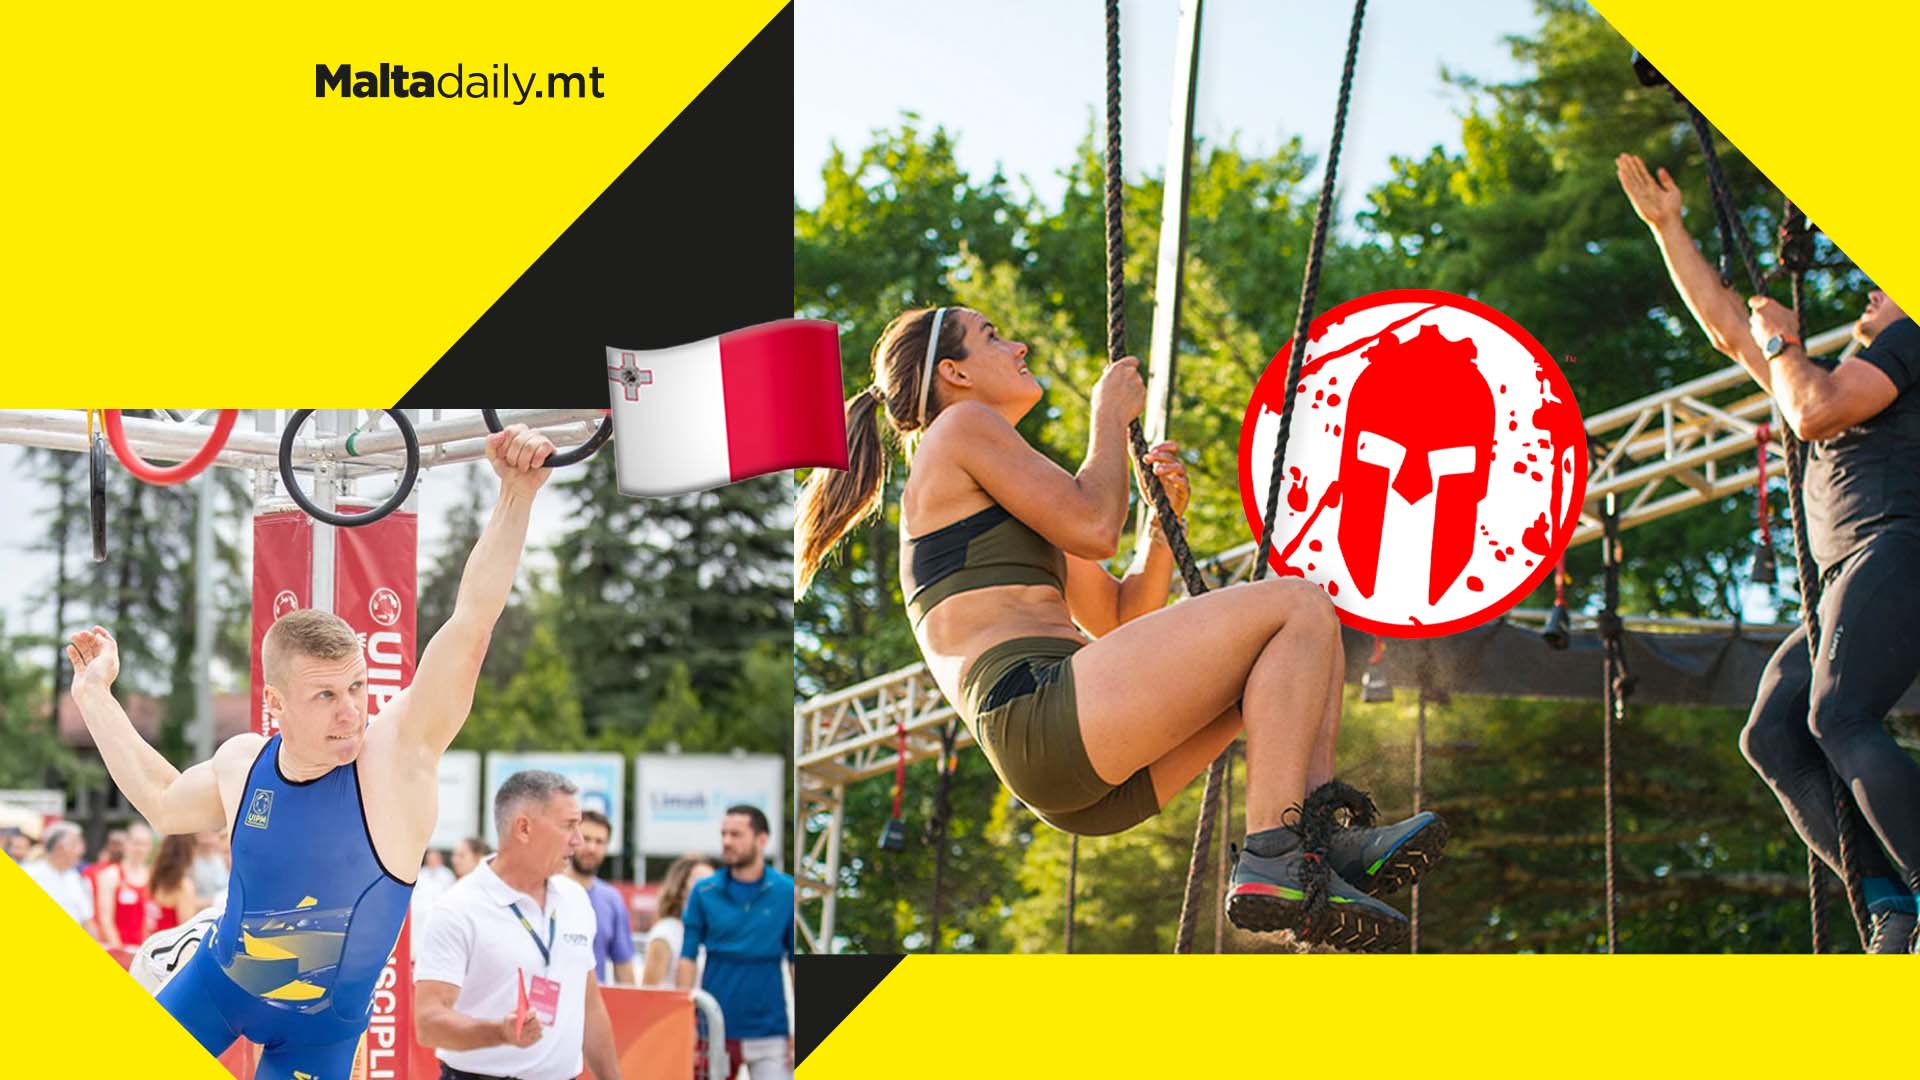 The world's leading obstacle race series Spartan Race is coming to Malta